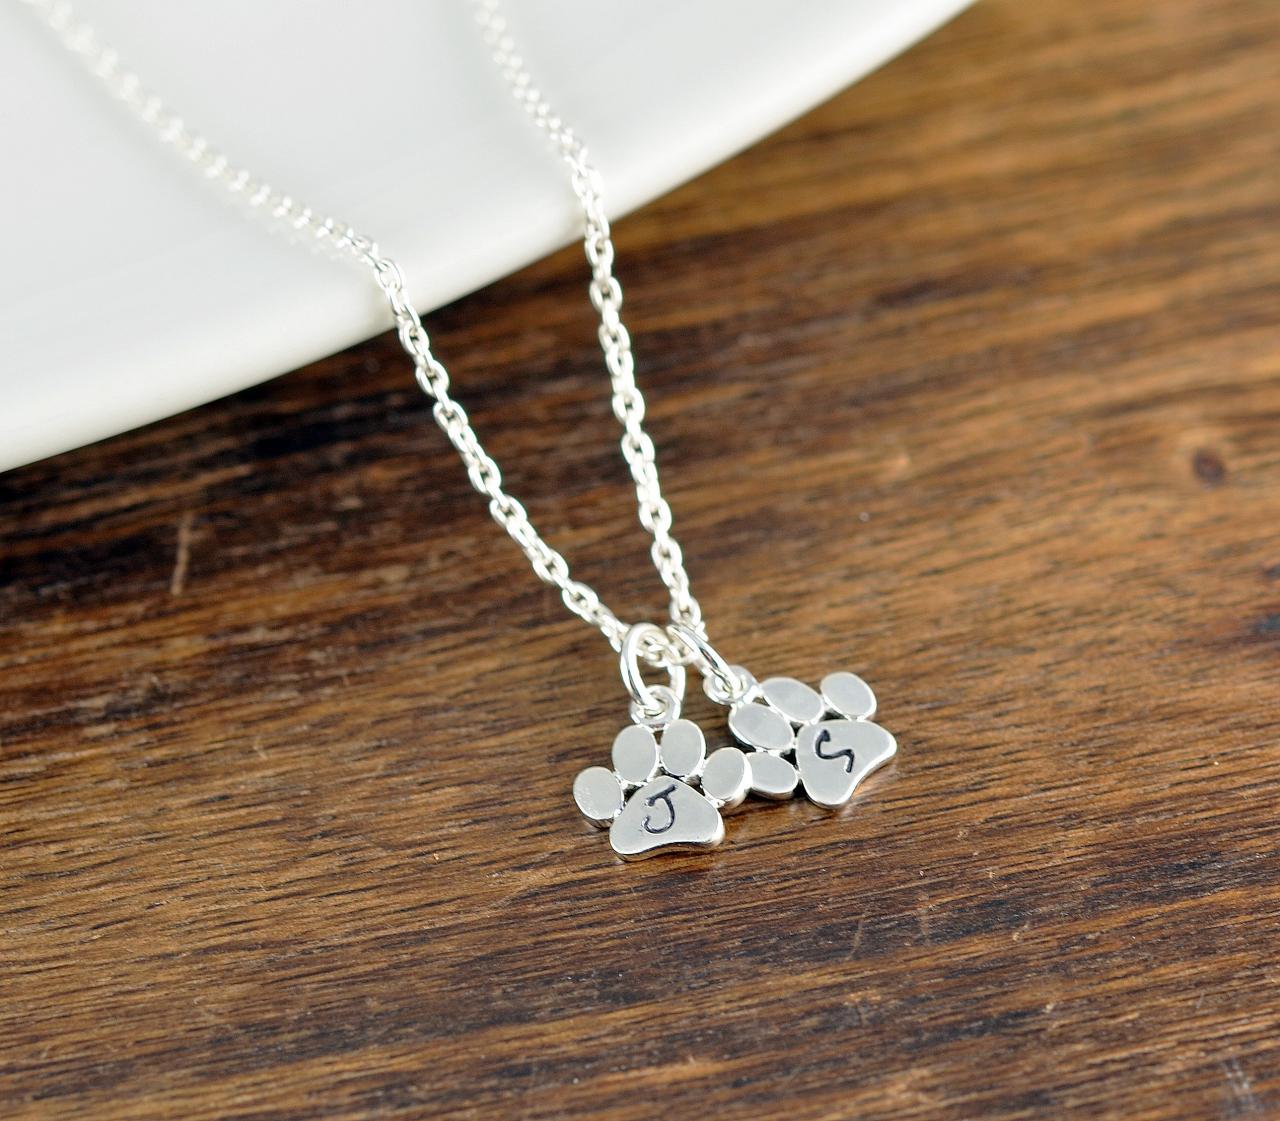 Dog Mom Gift, dog lover necklace, dog paw necklace, dog lover gift, animal lover gift, Initial necklace, charm necklace, gift for women